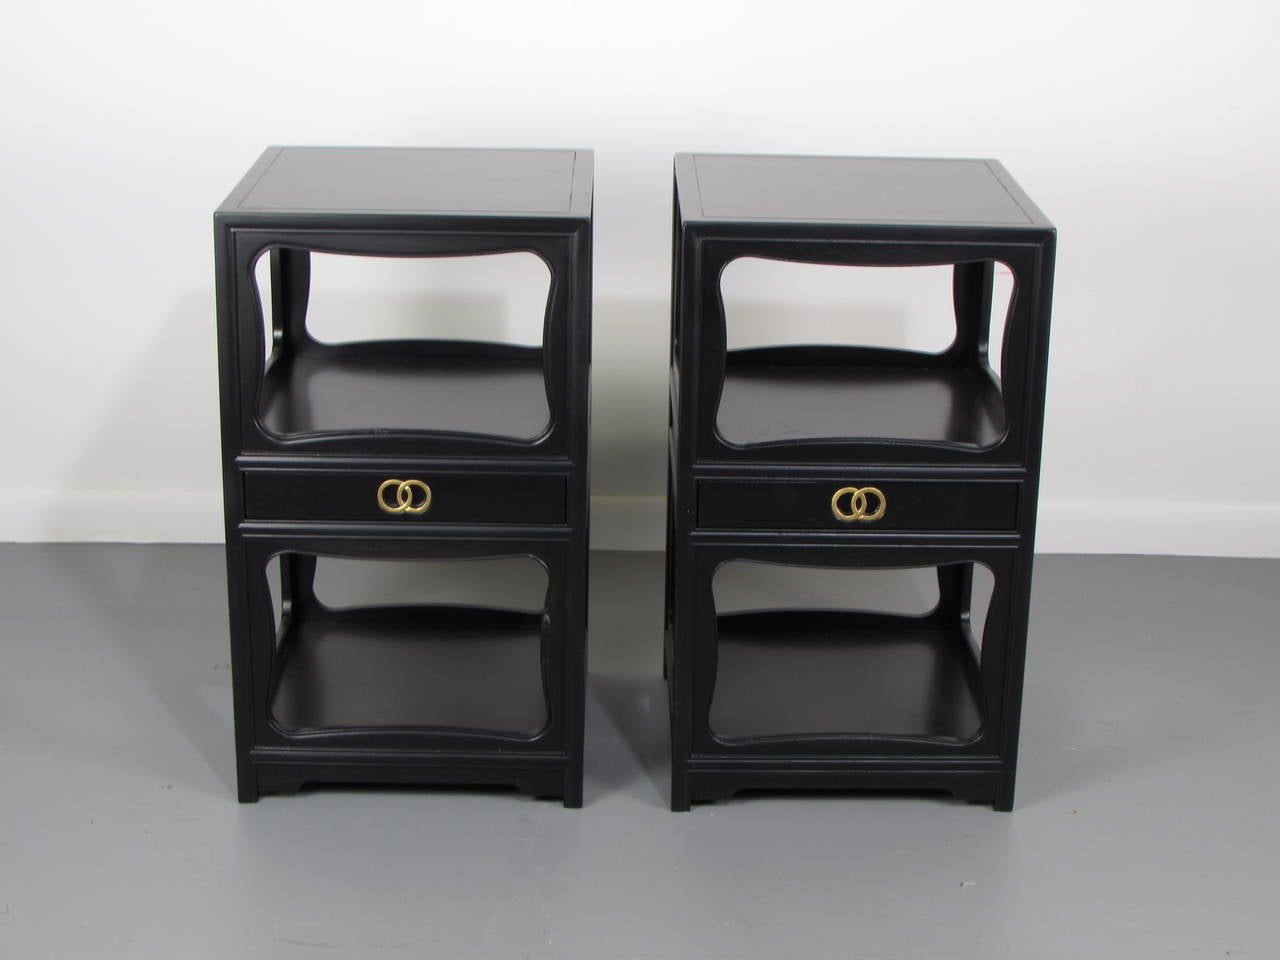 Pair of Hollywood Regency lacquered end tables or nightstands by Michael Taylor for Baker, 1950s. The gilded inset ring pulls in the center drawers are a signature of Michael Taylor's 